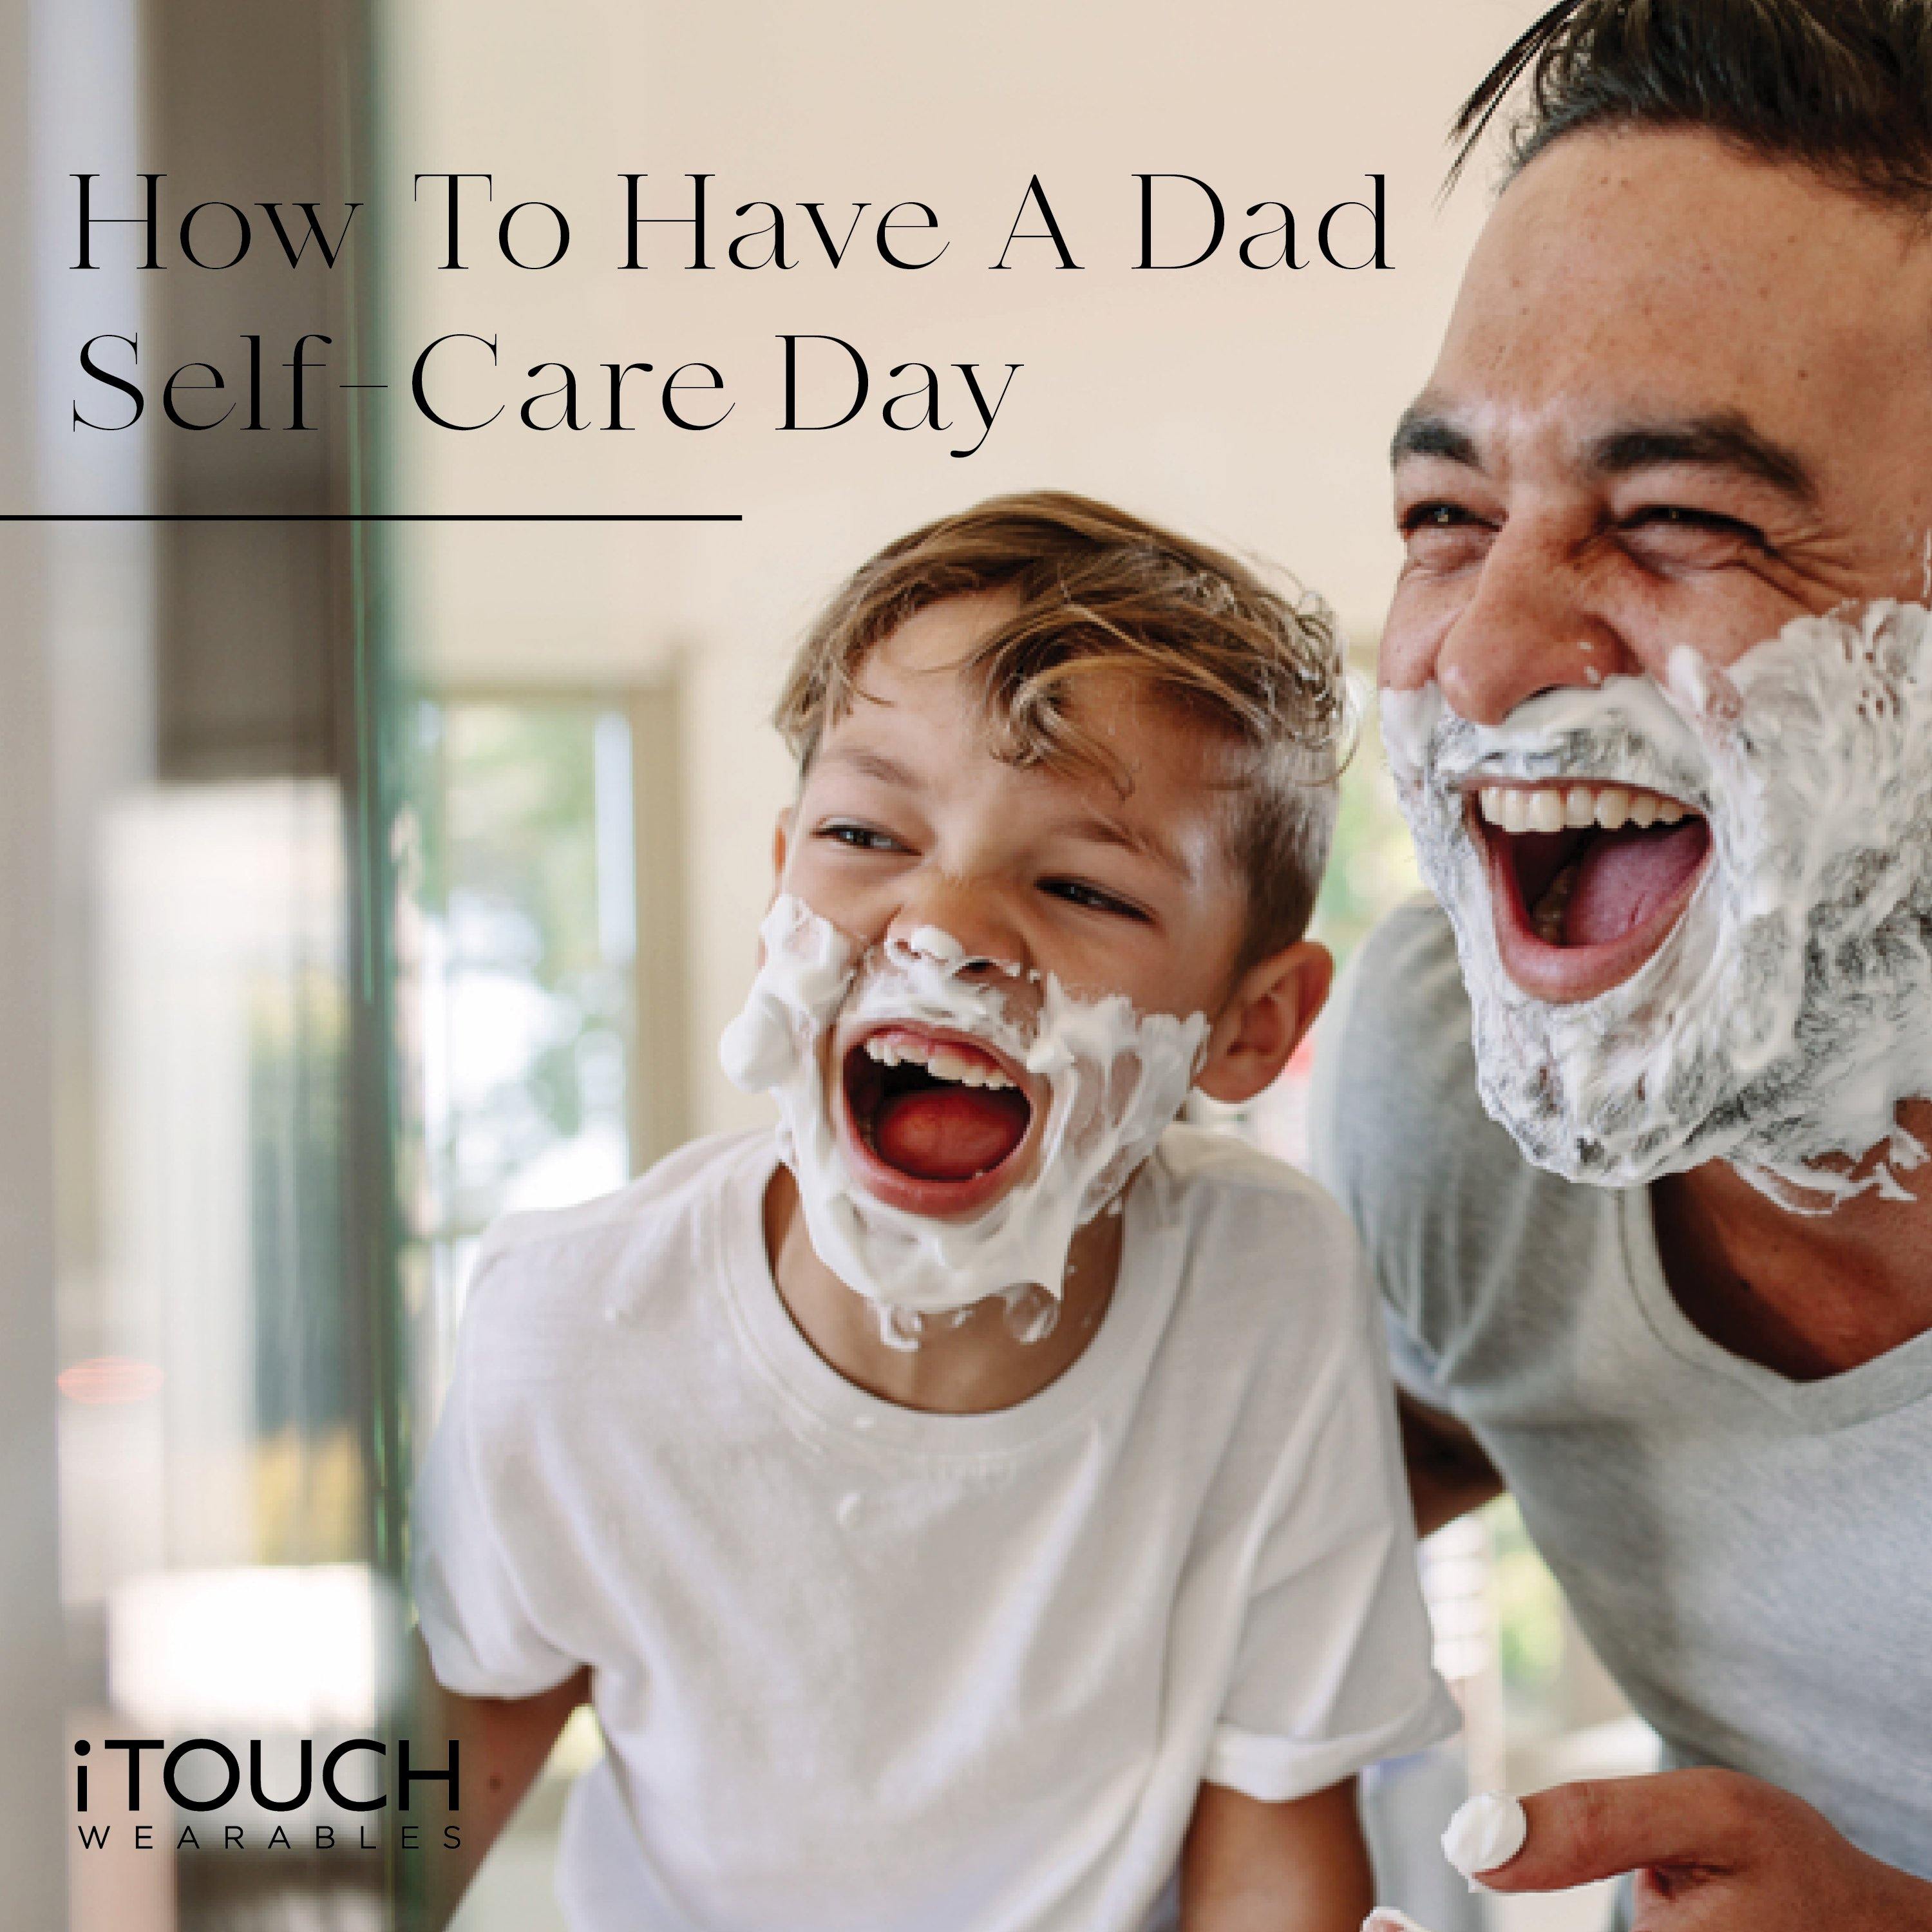 How To Have A Dad Self-Care Day - iTOUCH Wearables